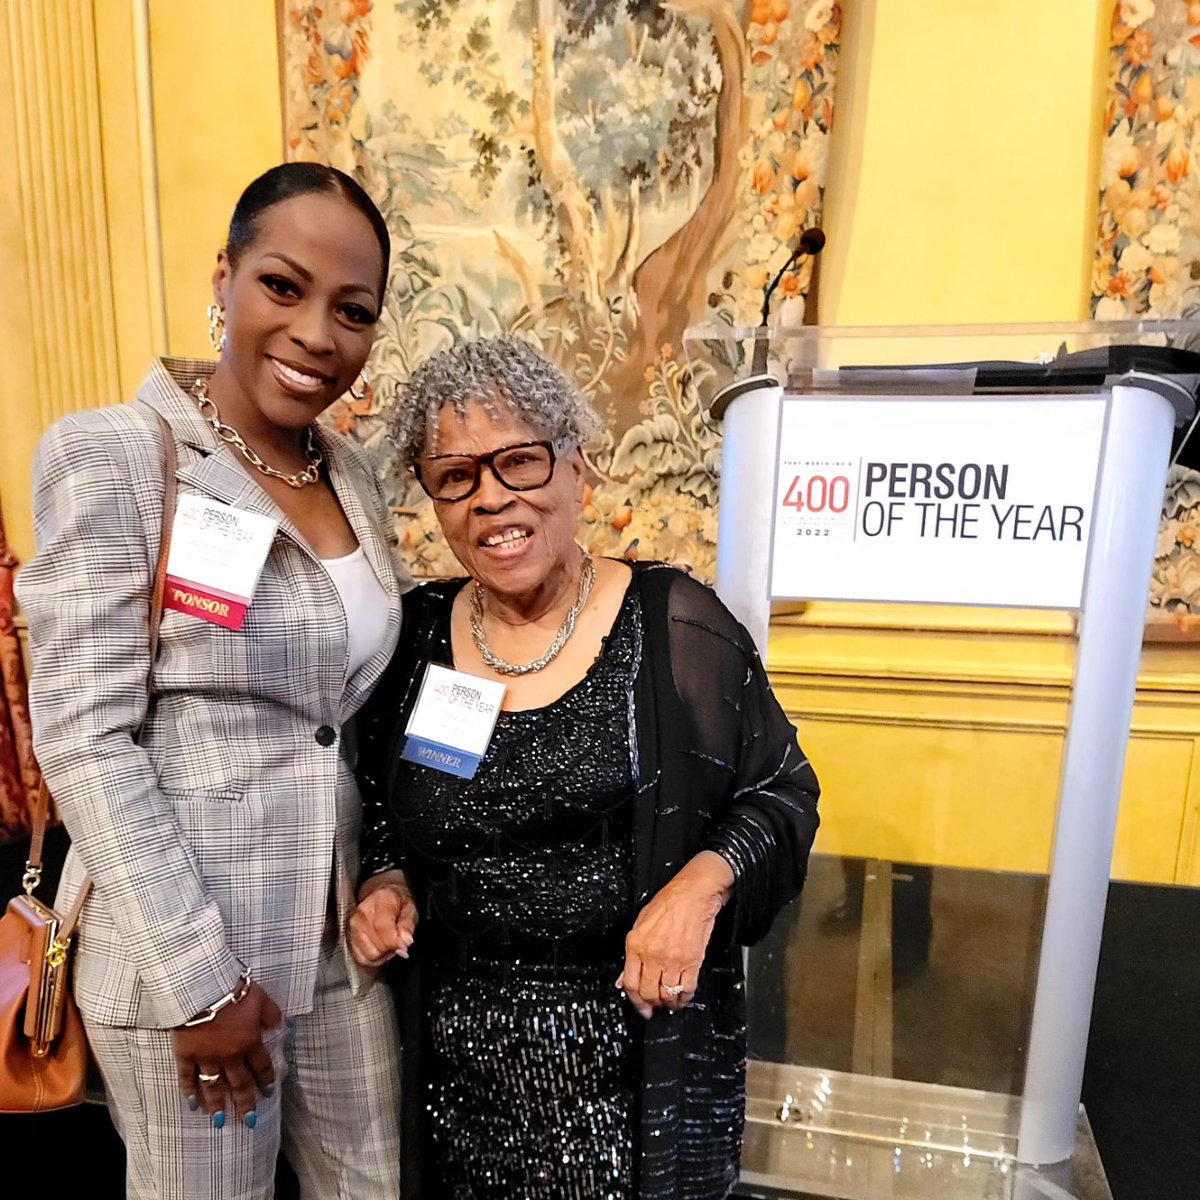 Happy 97th birthday to the amazing Ms. Opal Lee, the grandmother of Juneteenth!! You're such an inspiration!❤️🎉❤️ • • • • • • #NJM #NationalJuneteenthMuseum #birthday #birthdaygirl #leader #celebrity #icon #photo #photooftheday #instaphotography #influncer #inspiration